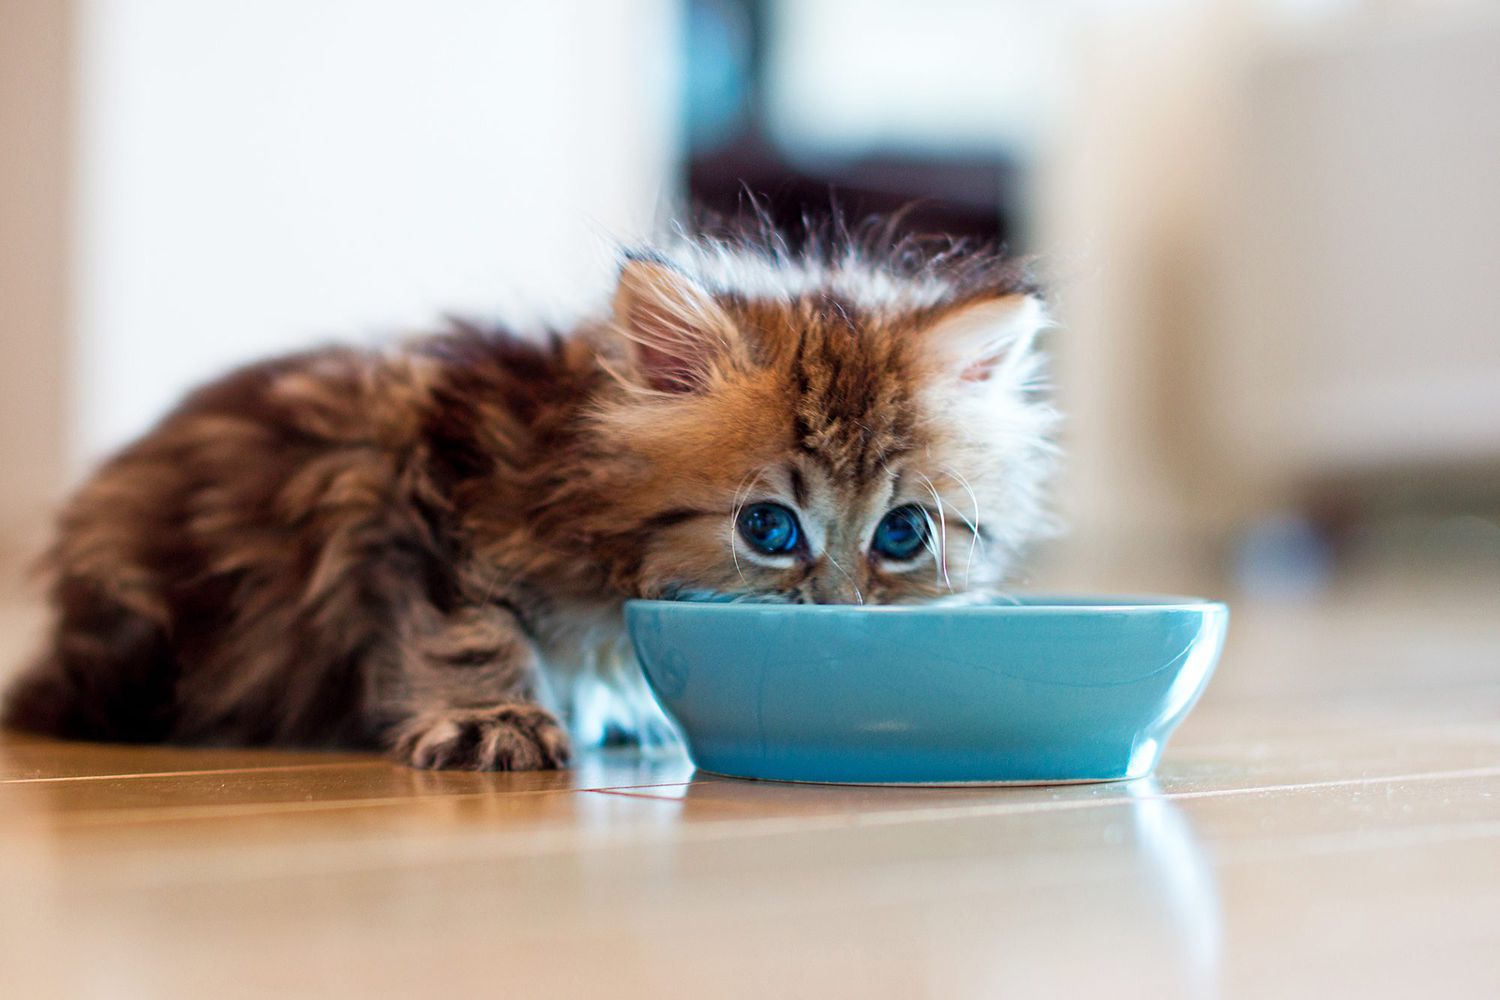 six-week-old kitten eating out of blue bowl